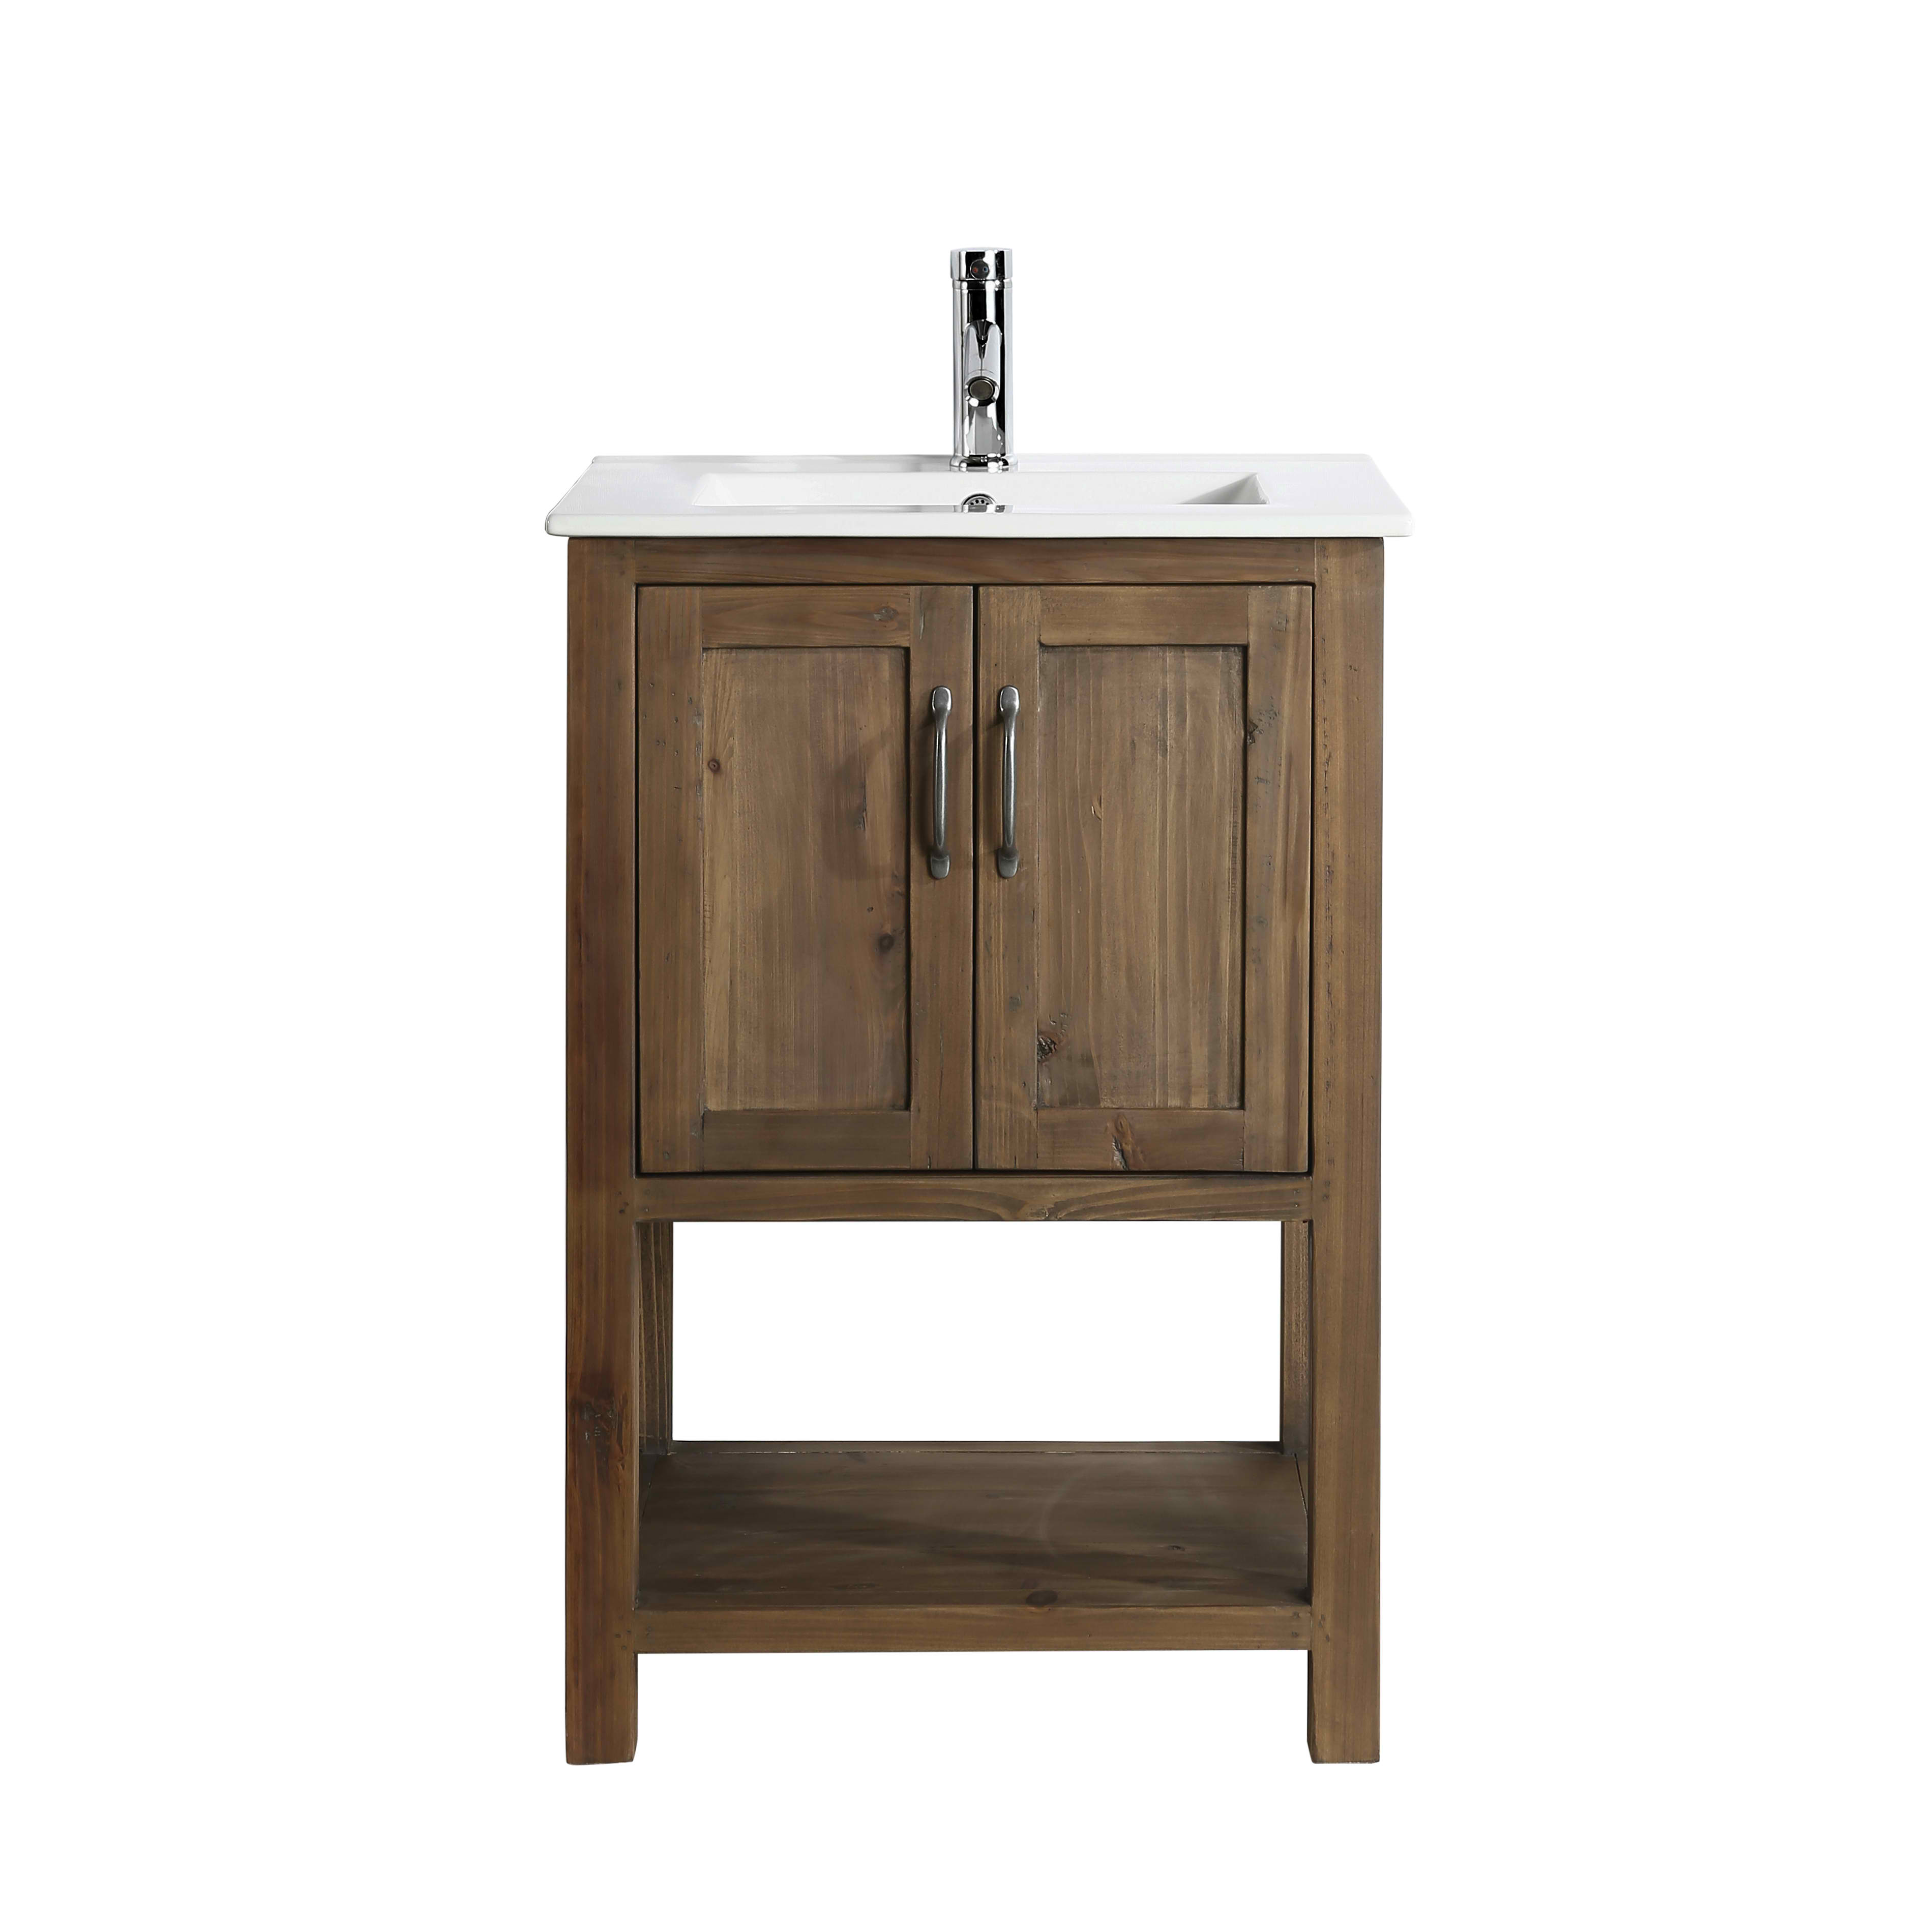 Rustic 24" Single Sink Bathroom Vanity with Porcelain Integrated Countertop in Walnut Finish